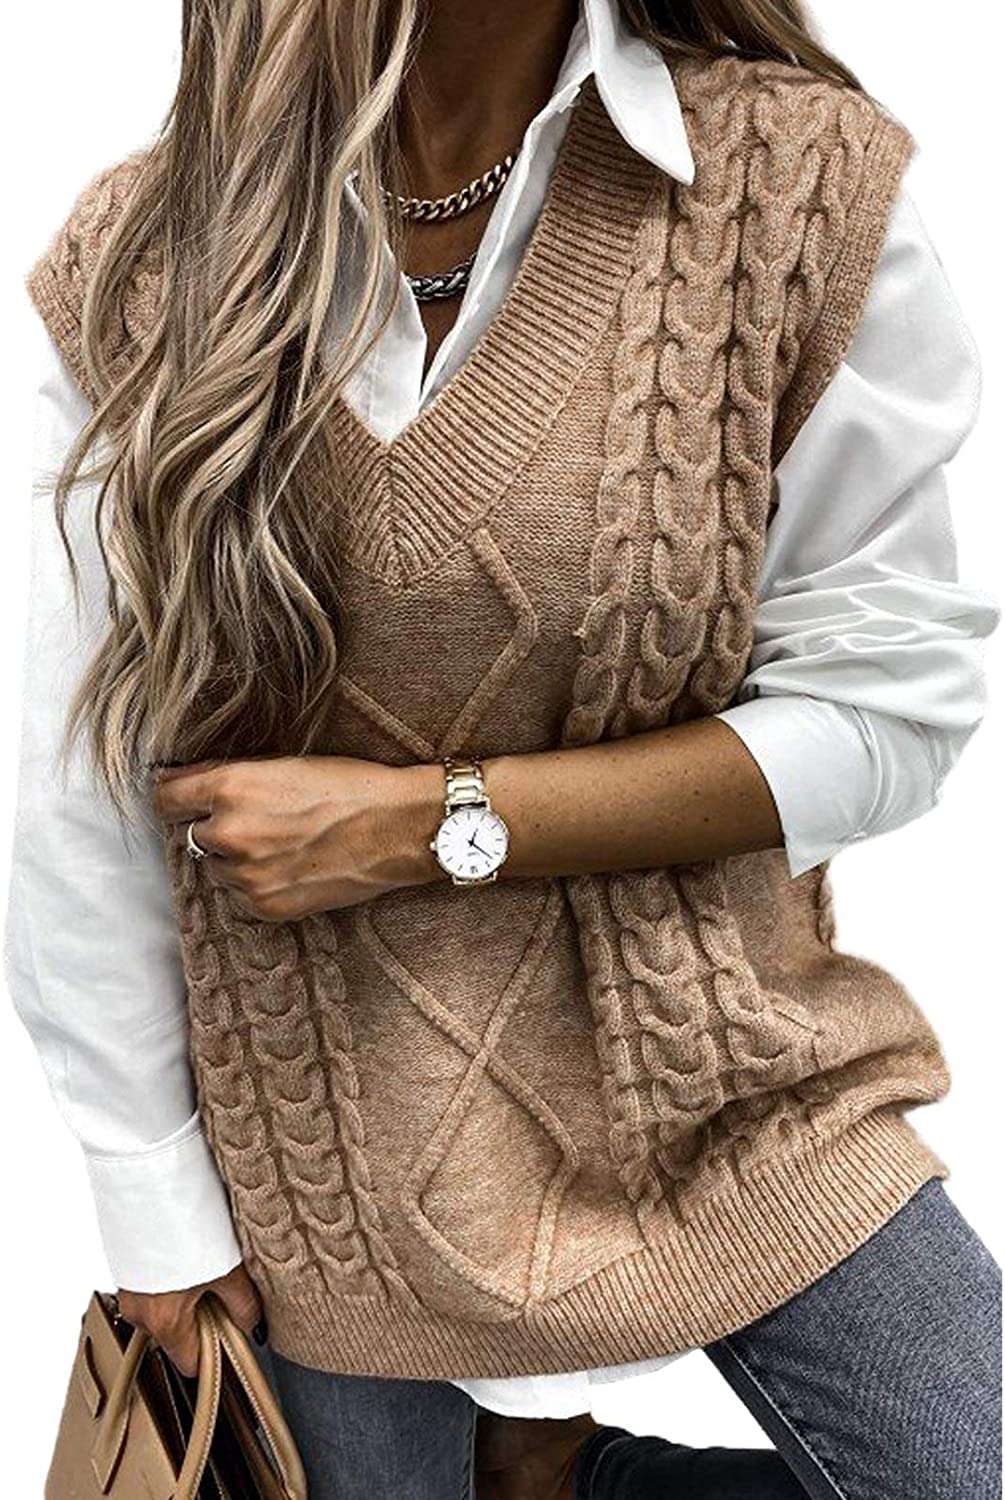 YUESUO Sweater Vest Women Oversized Houndstooth V Neck Pullover Casual Vintage Sleeveless Knitted Tops. 